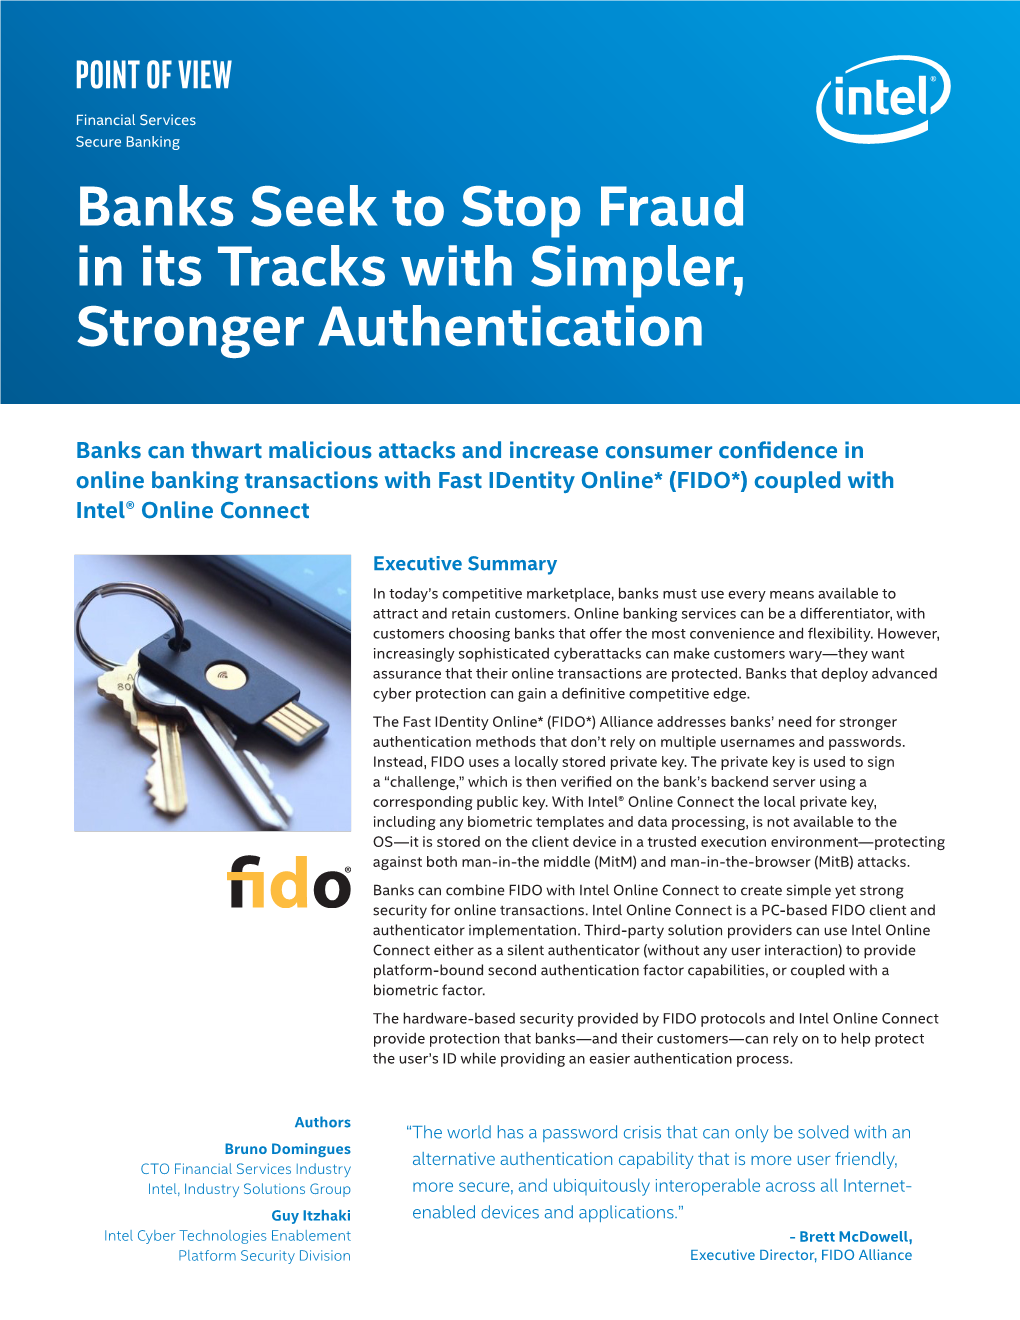 Banks Seek to Stop Fraud in Its Tracks with Simpler, Stronger Authentication